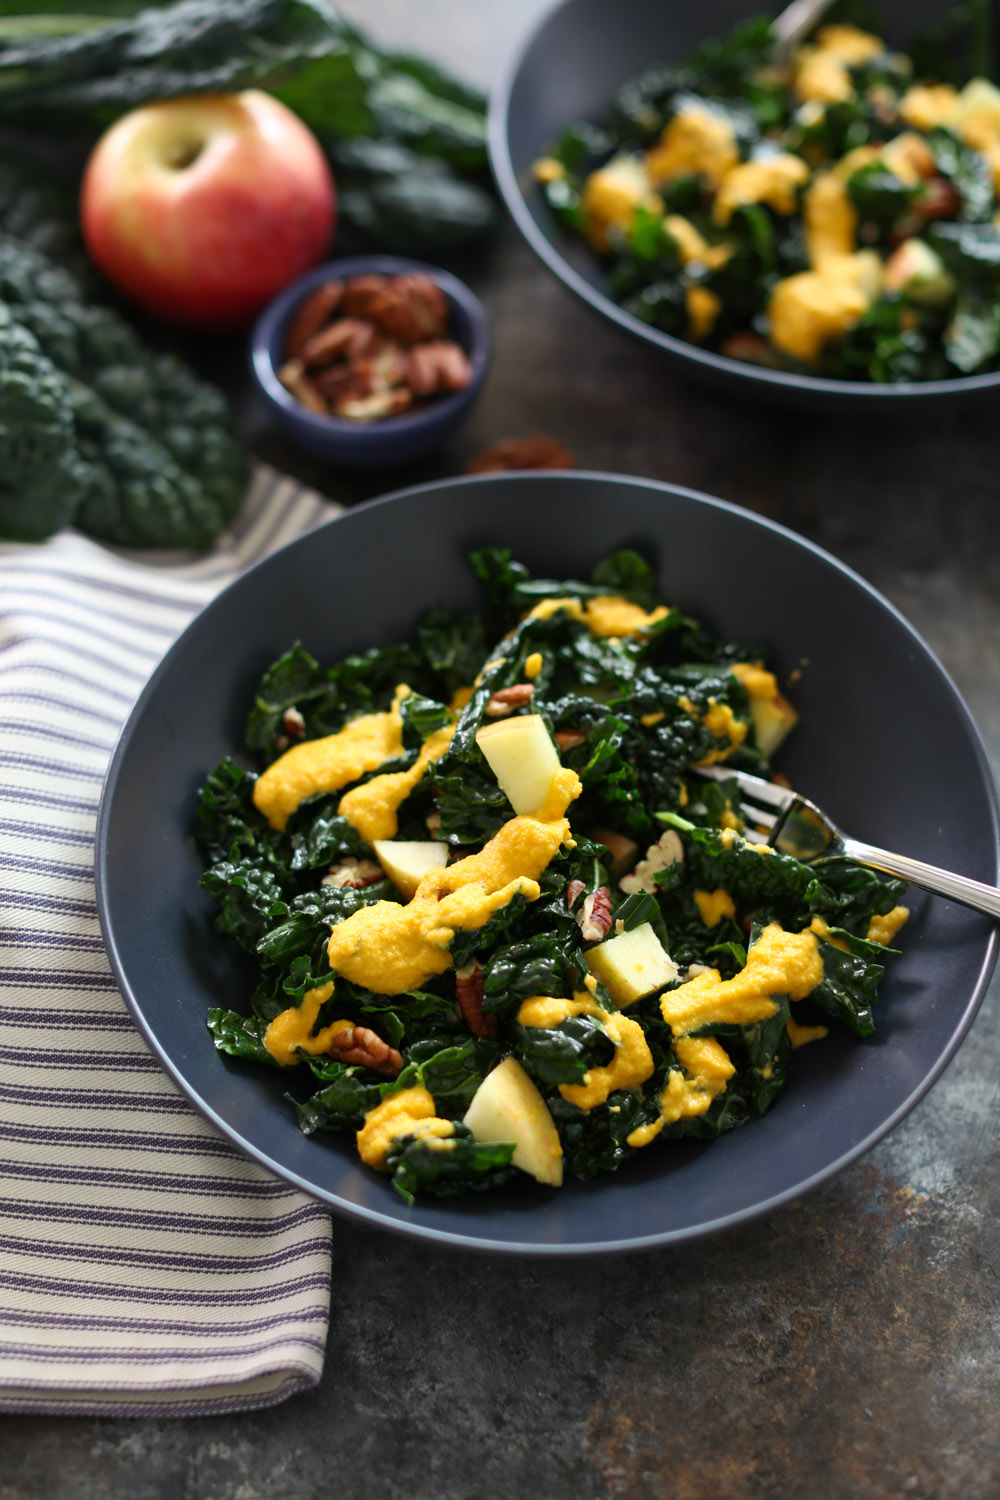 Kale Salad with Carrot Ginger Dressing